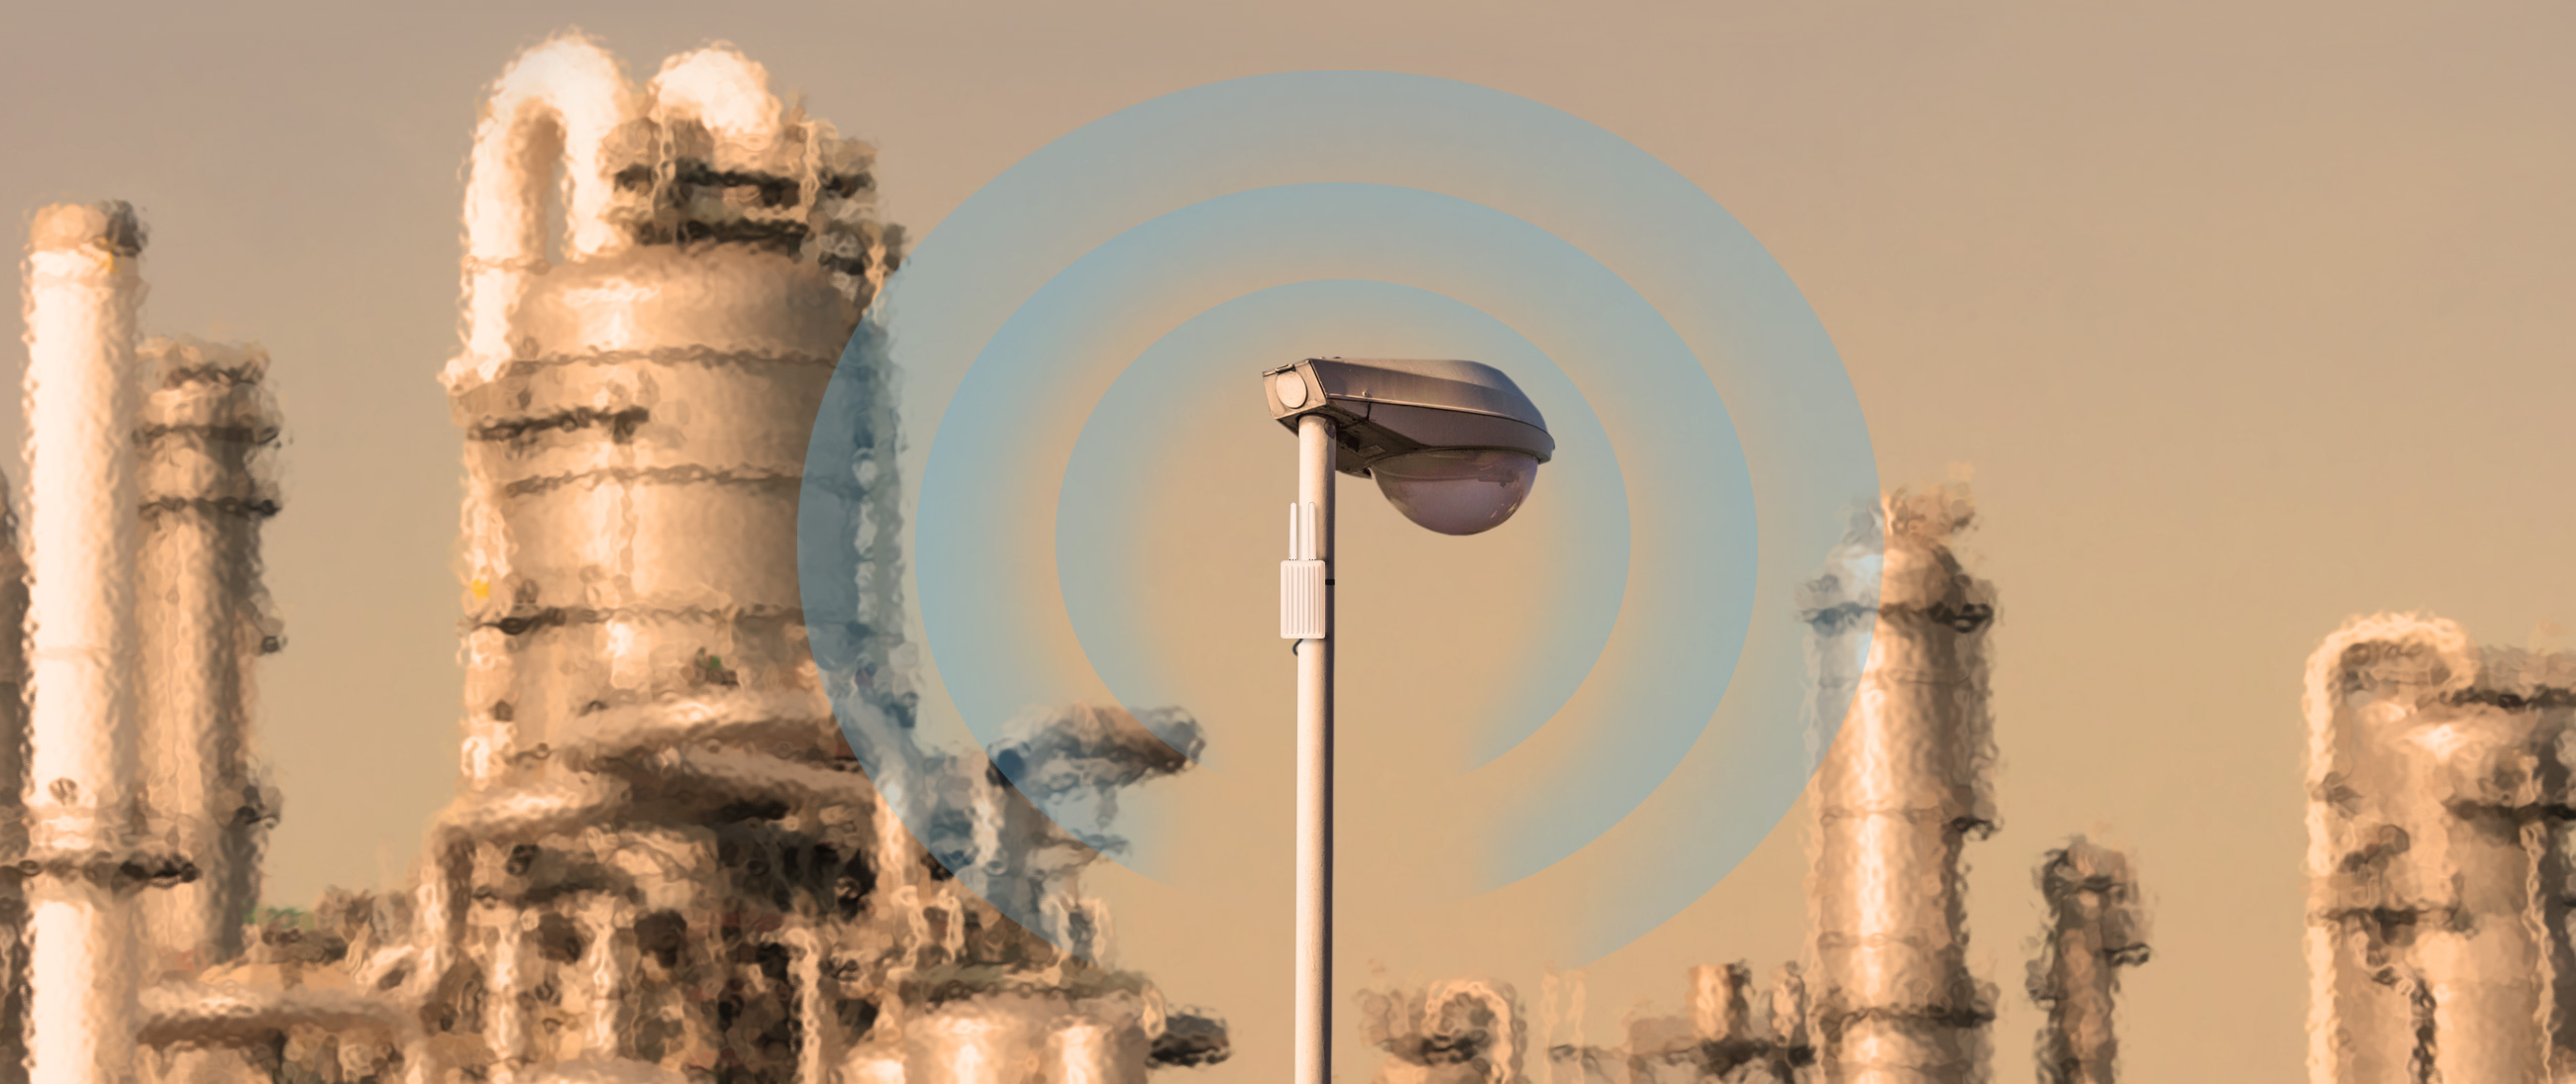 DIS-3650AP deployed on a pole in a hot industrial environment.